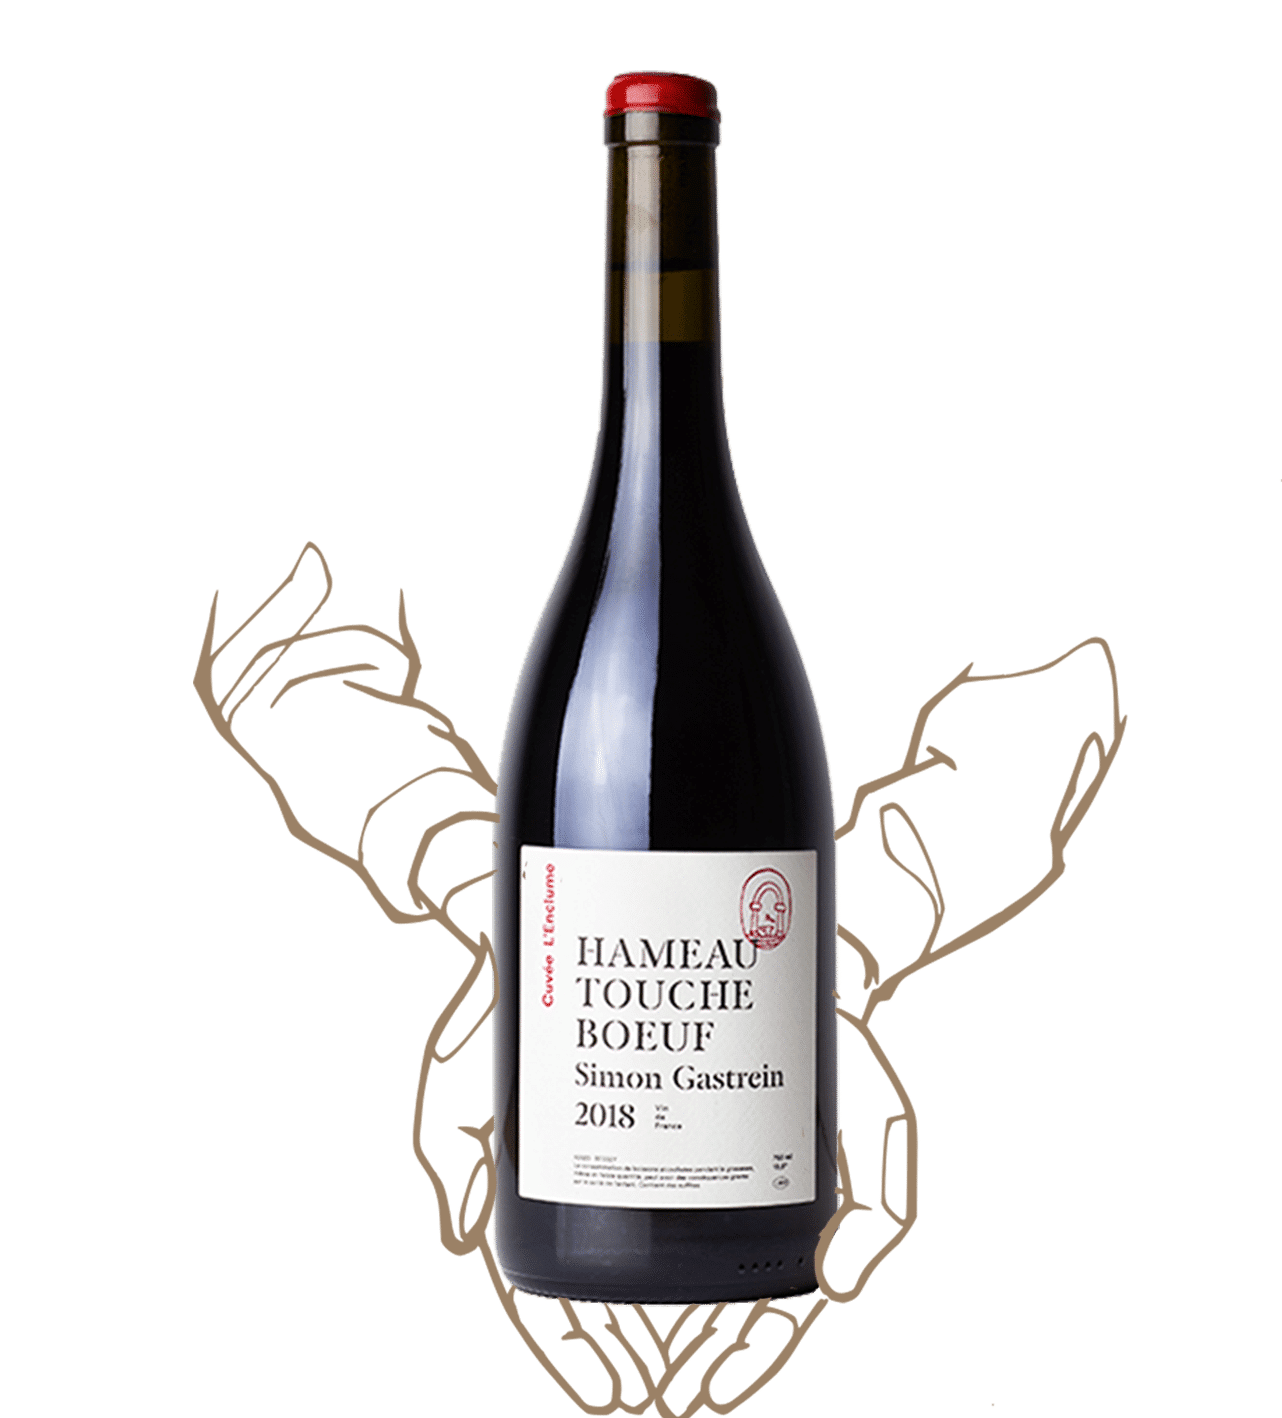 L'enclume by hameau toucheboeuf is a natural wine